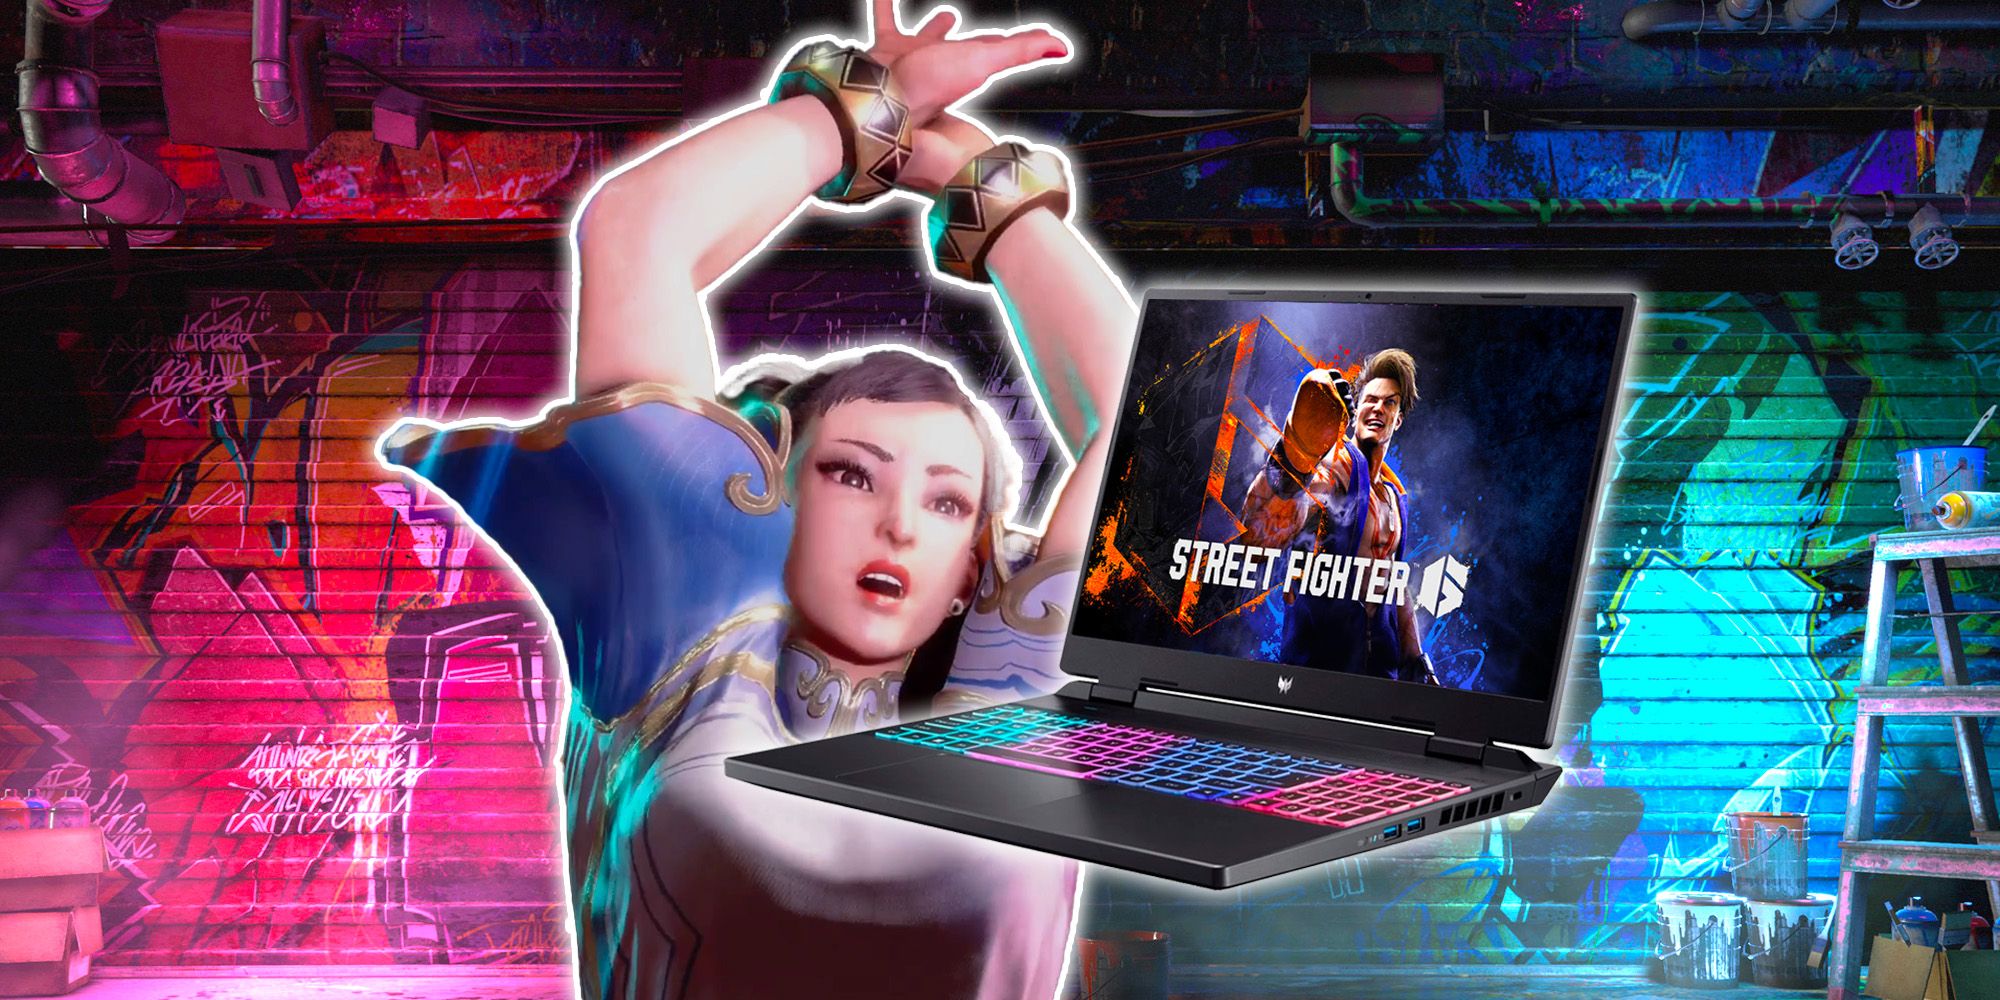 Street Fighter 6 background with Chun Li stretching and a PC with SF6 start screen.